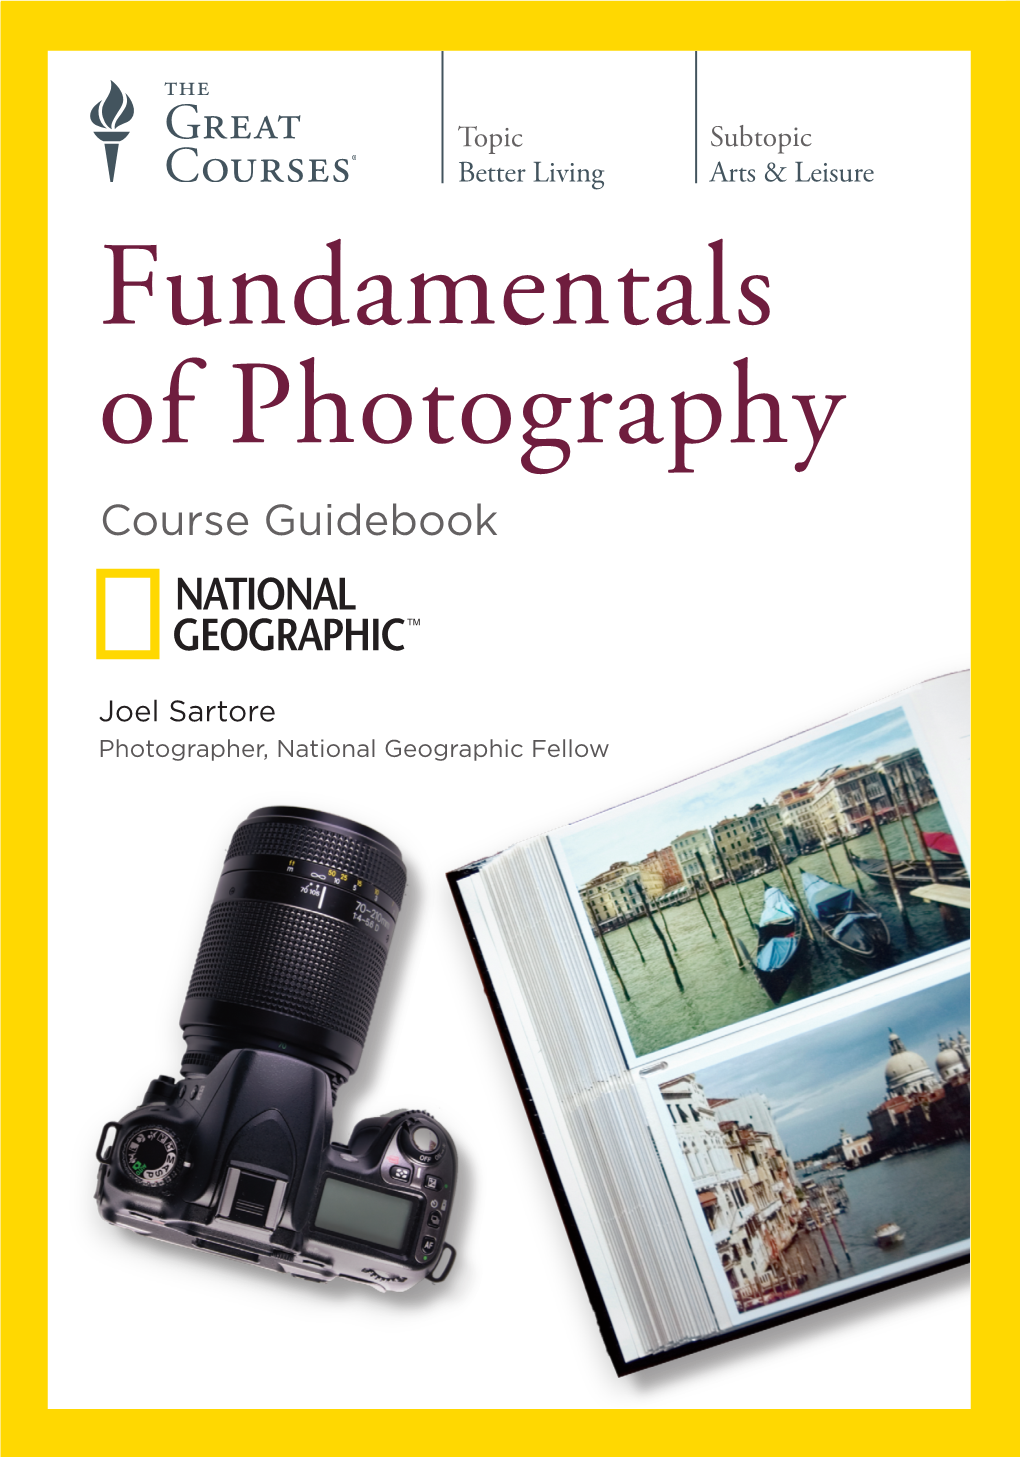 Fundamentals of Photography Course Guidebook